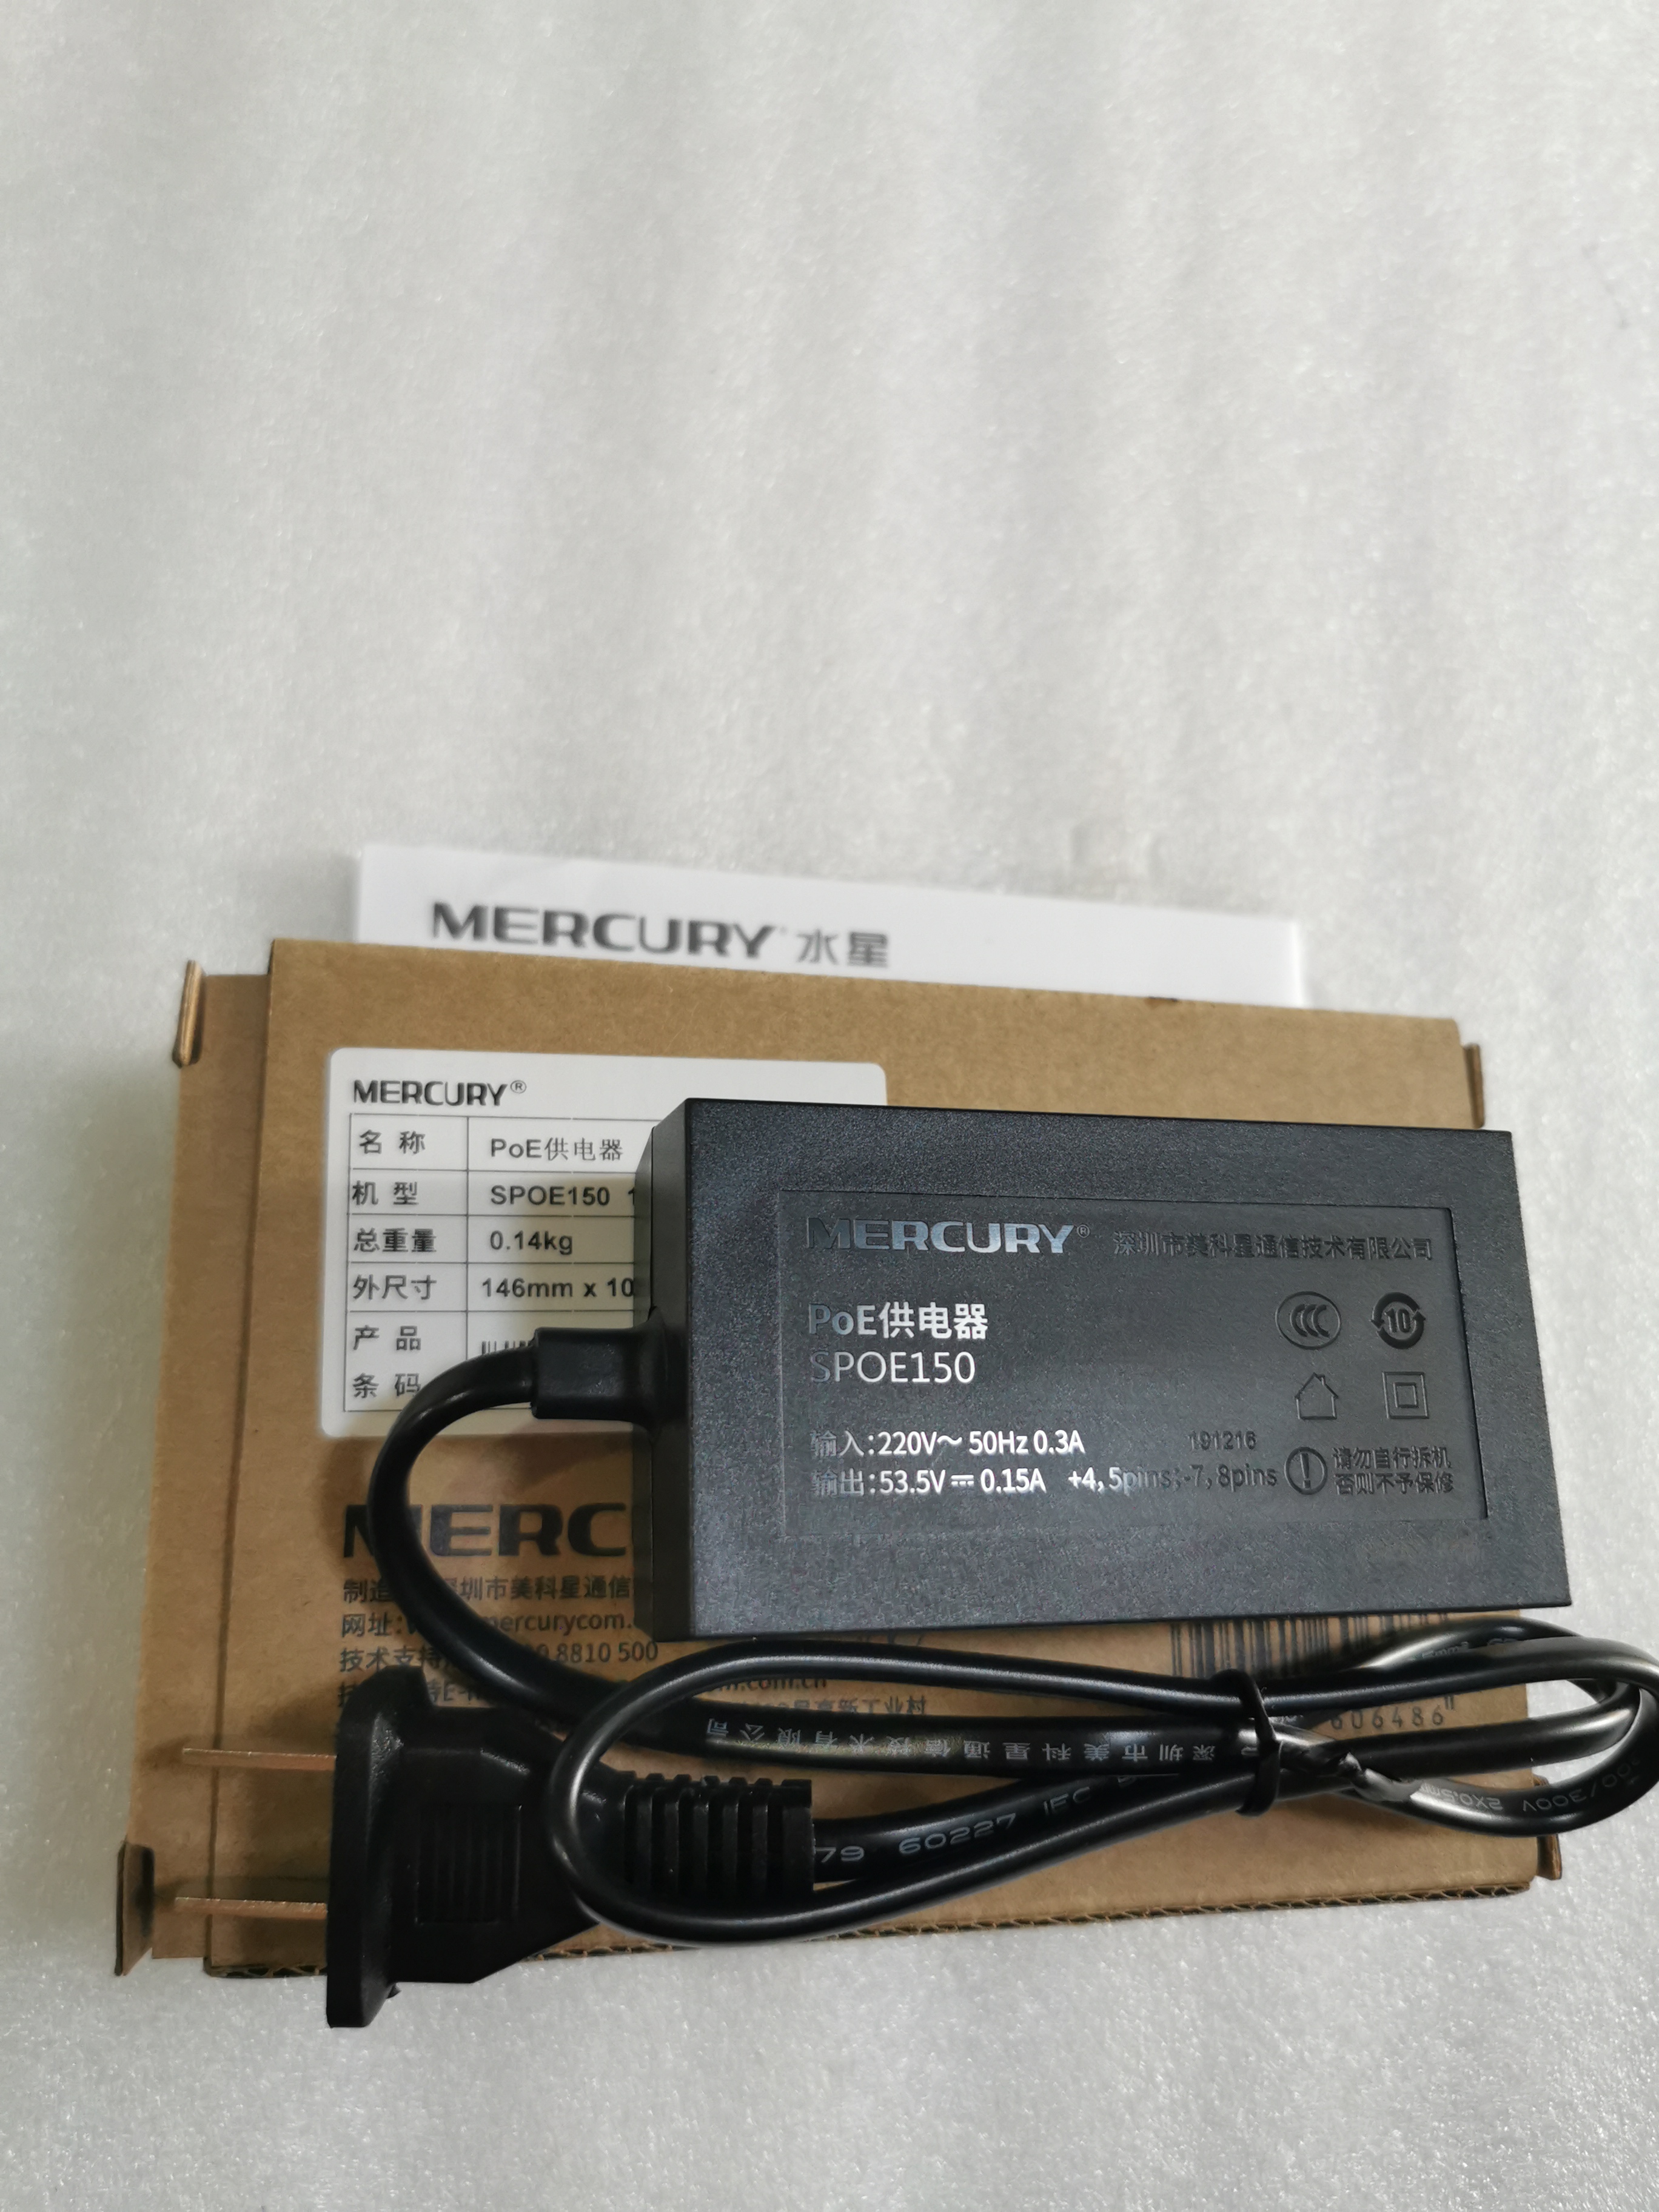 *Brand NEW* T535015-2-POE 53.5V 0.15A AC DC ADAPTER POWER SUPPLY